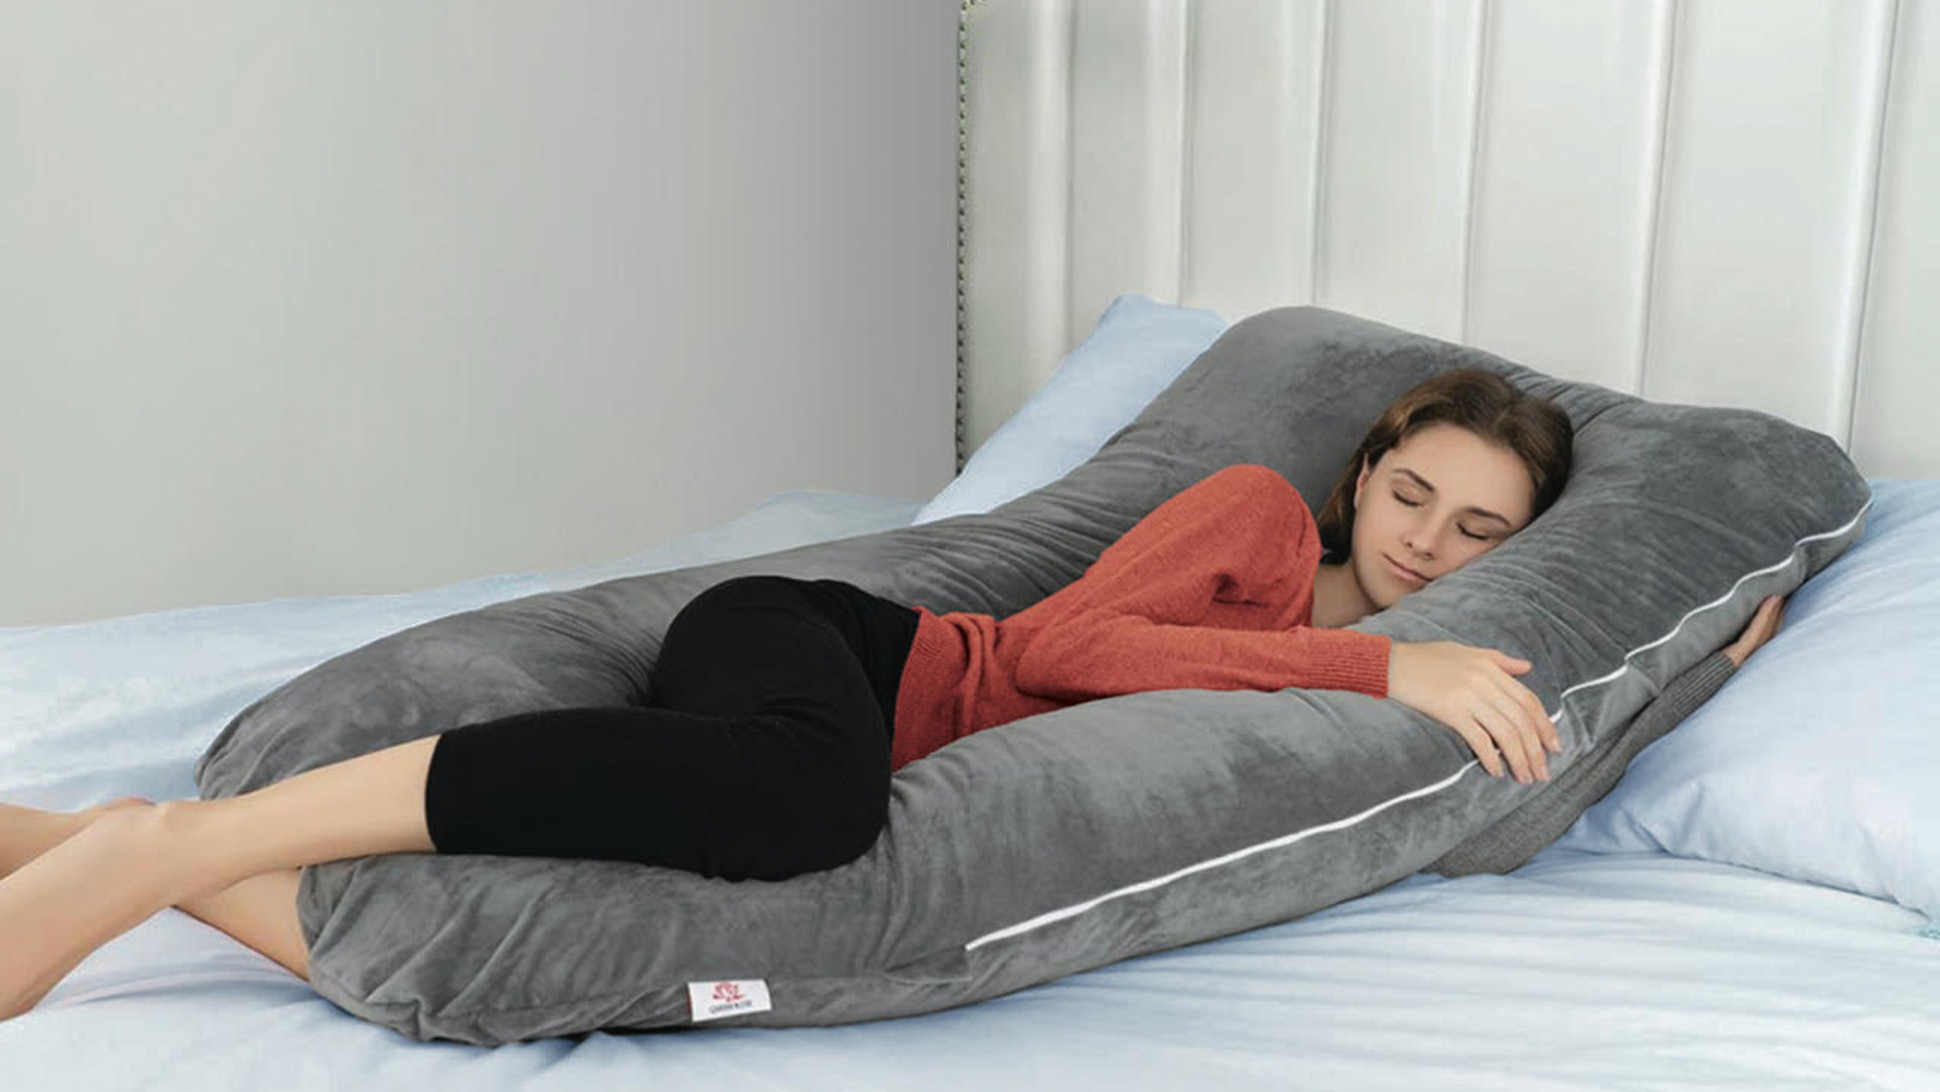 https://www.bestphysicaltherapistnyc.com/wp-content/uploads/2020/02/best-body-pillows-for-back-pain-karena-wu-best-pt-nyc.jpg